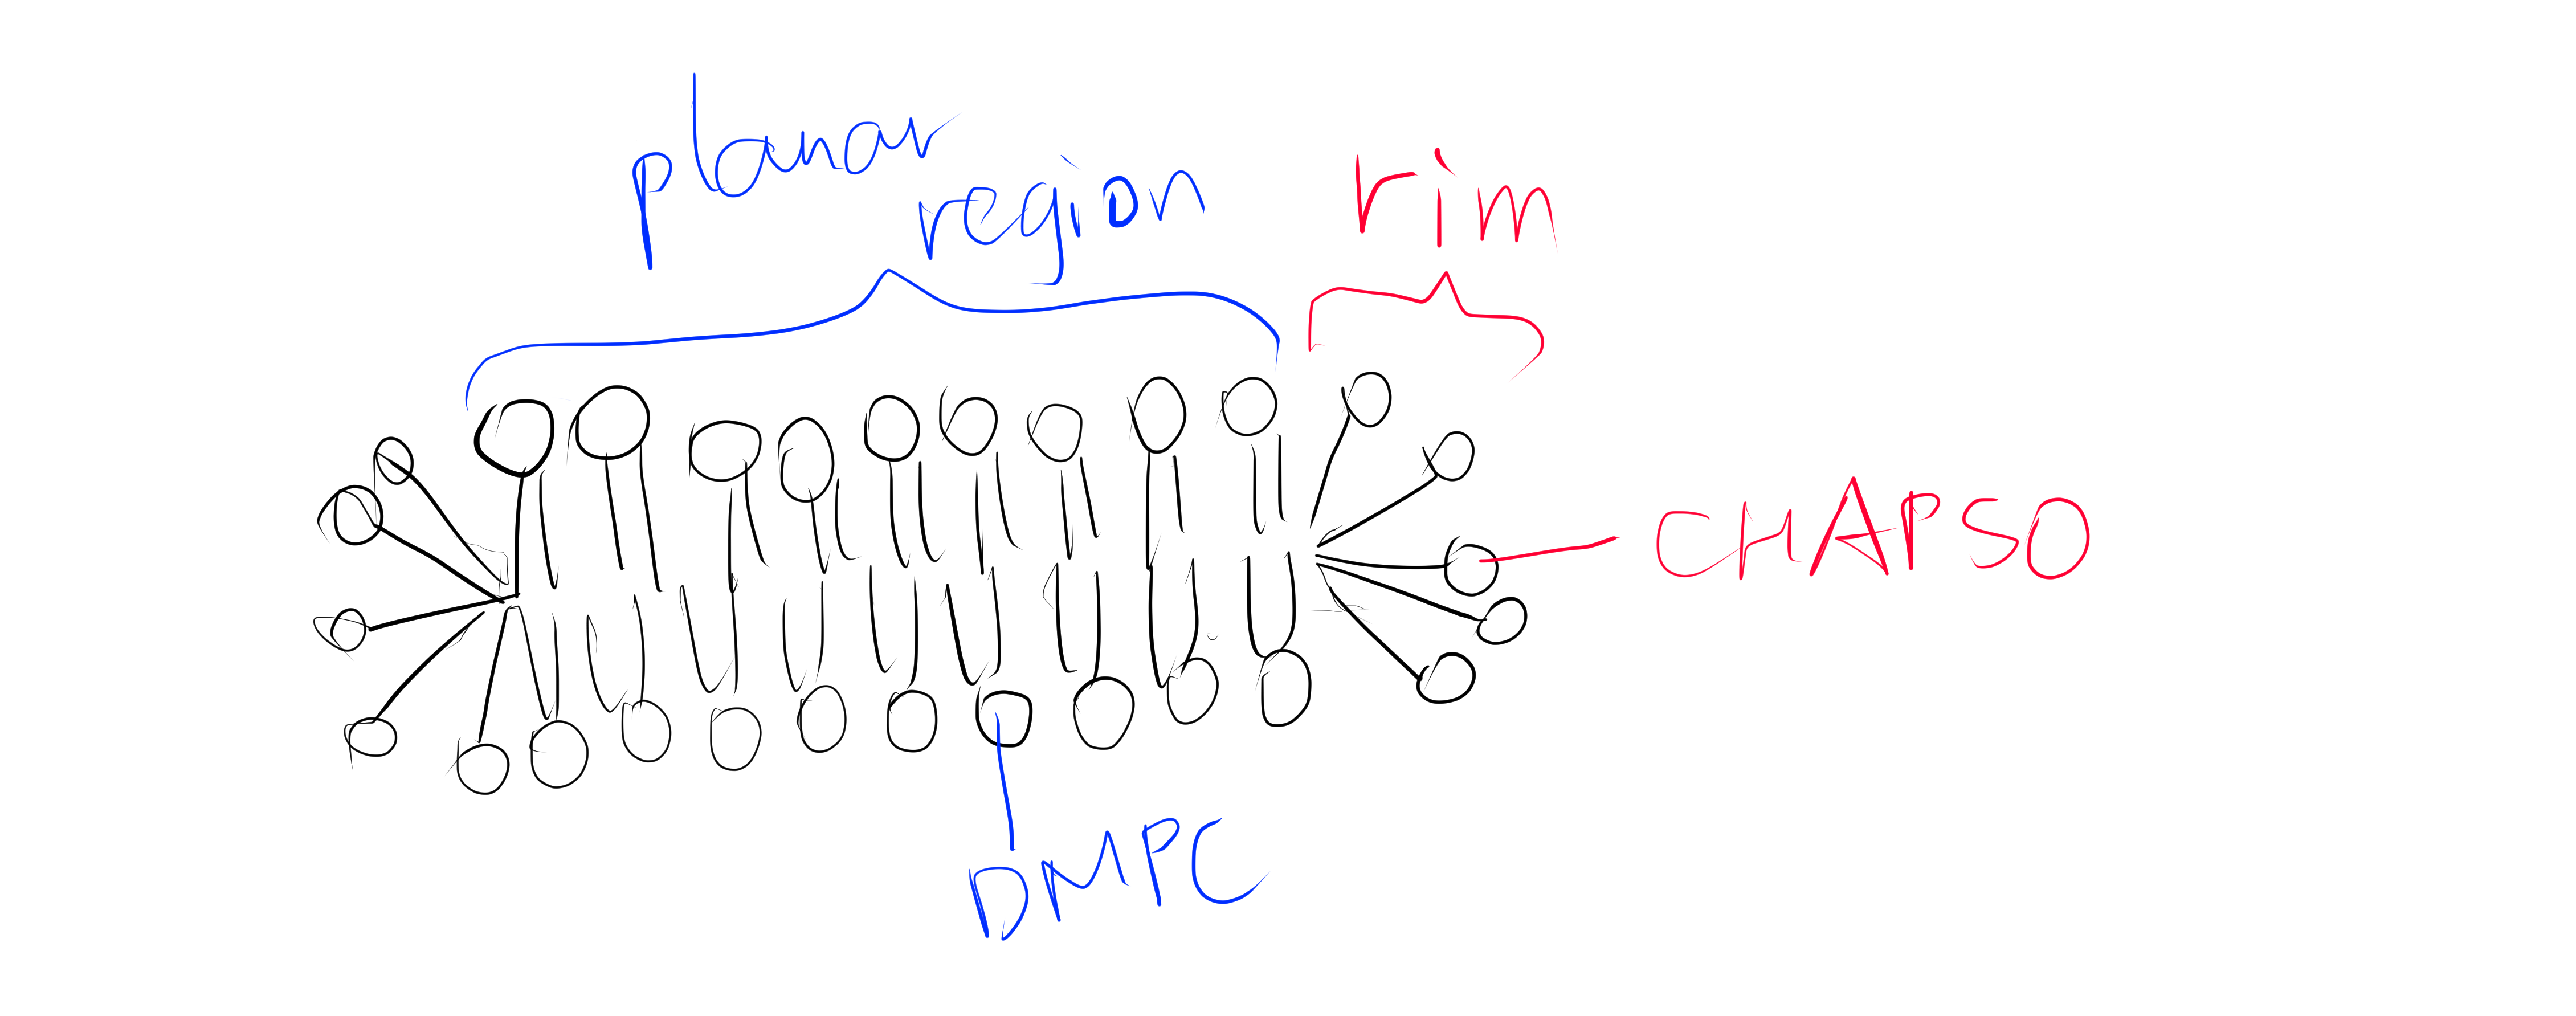 The DMPC:CHAPSO bicelle. Bicelles are disks with a planar region formed by long chain lipid phospholipids and a rim composed of short chain phospholipids or detergent molecules. It provides an environment that resembles a lipid bilayer where membrane proteins' natively resides. Membrane proteins can be incorporated into bicelles for functional studies as well as crystallisation.